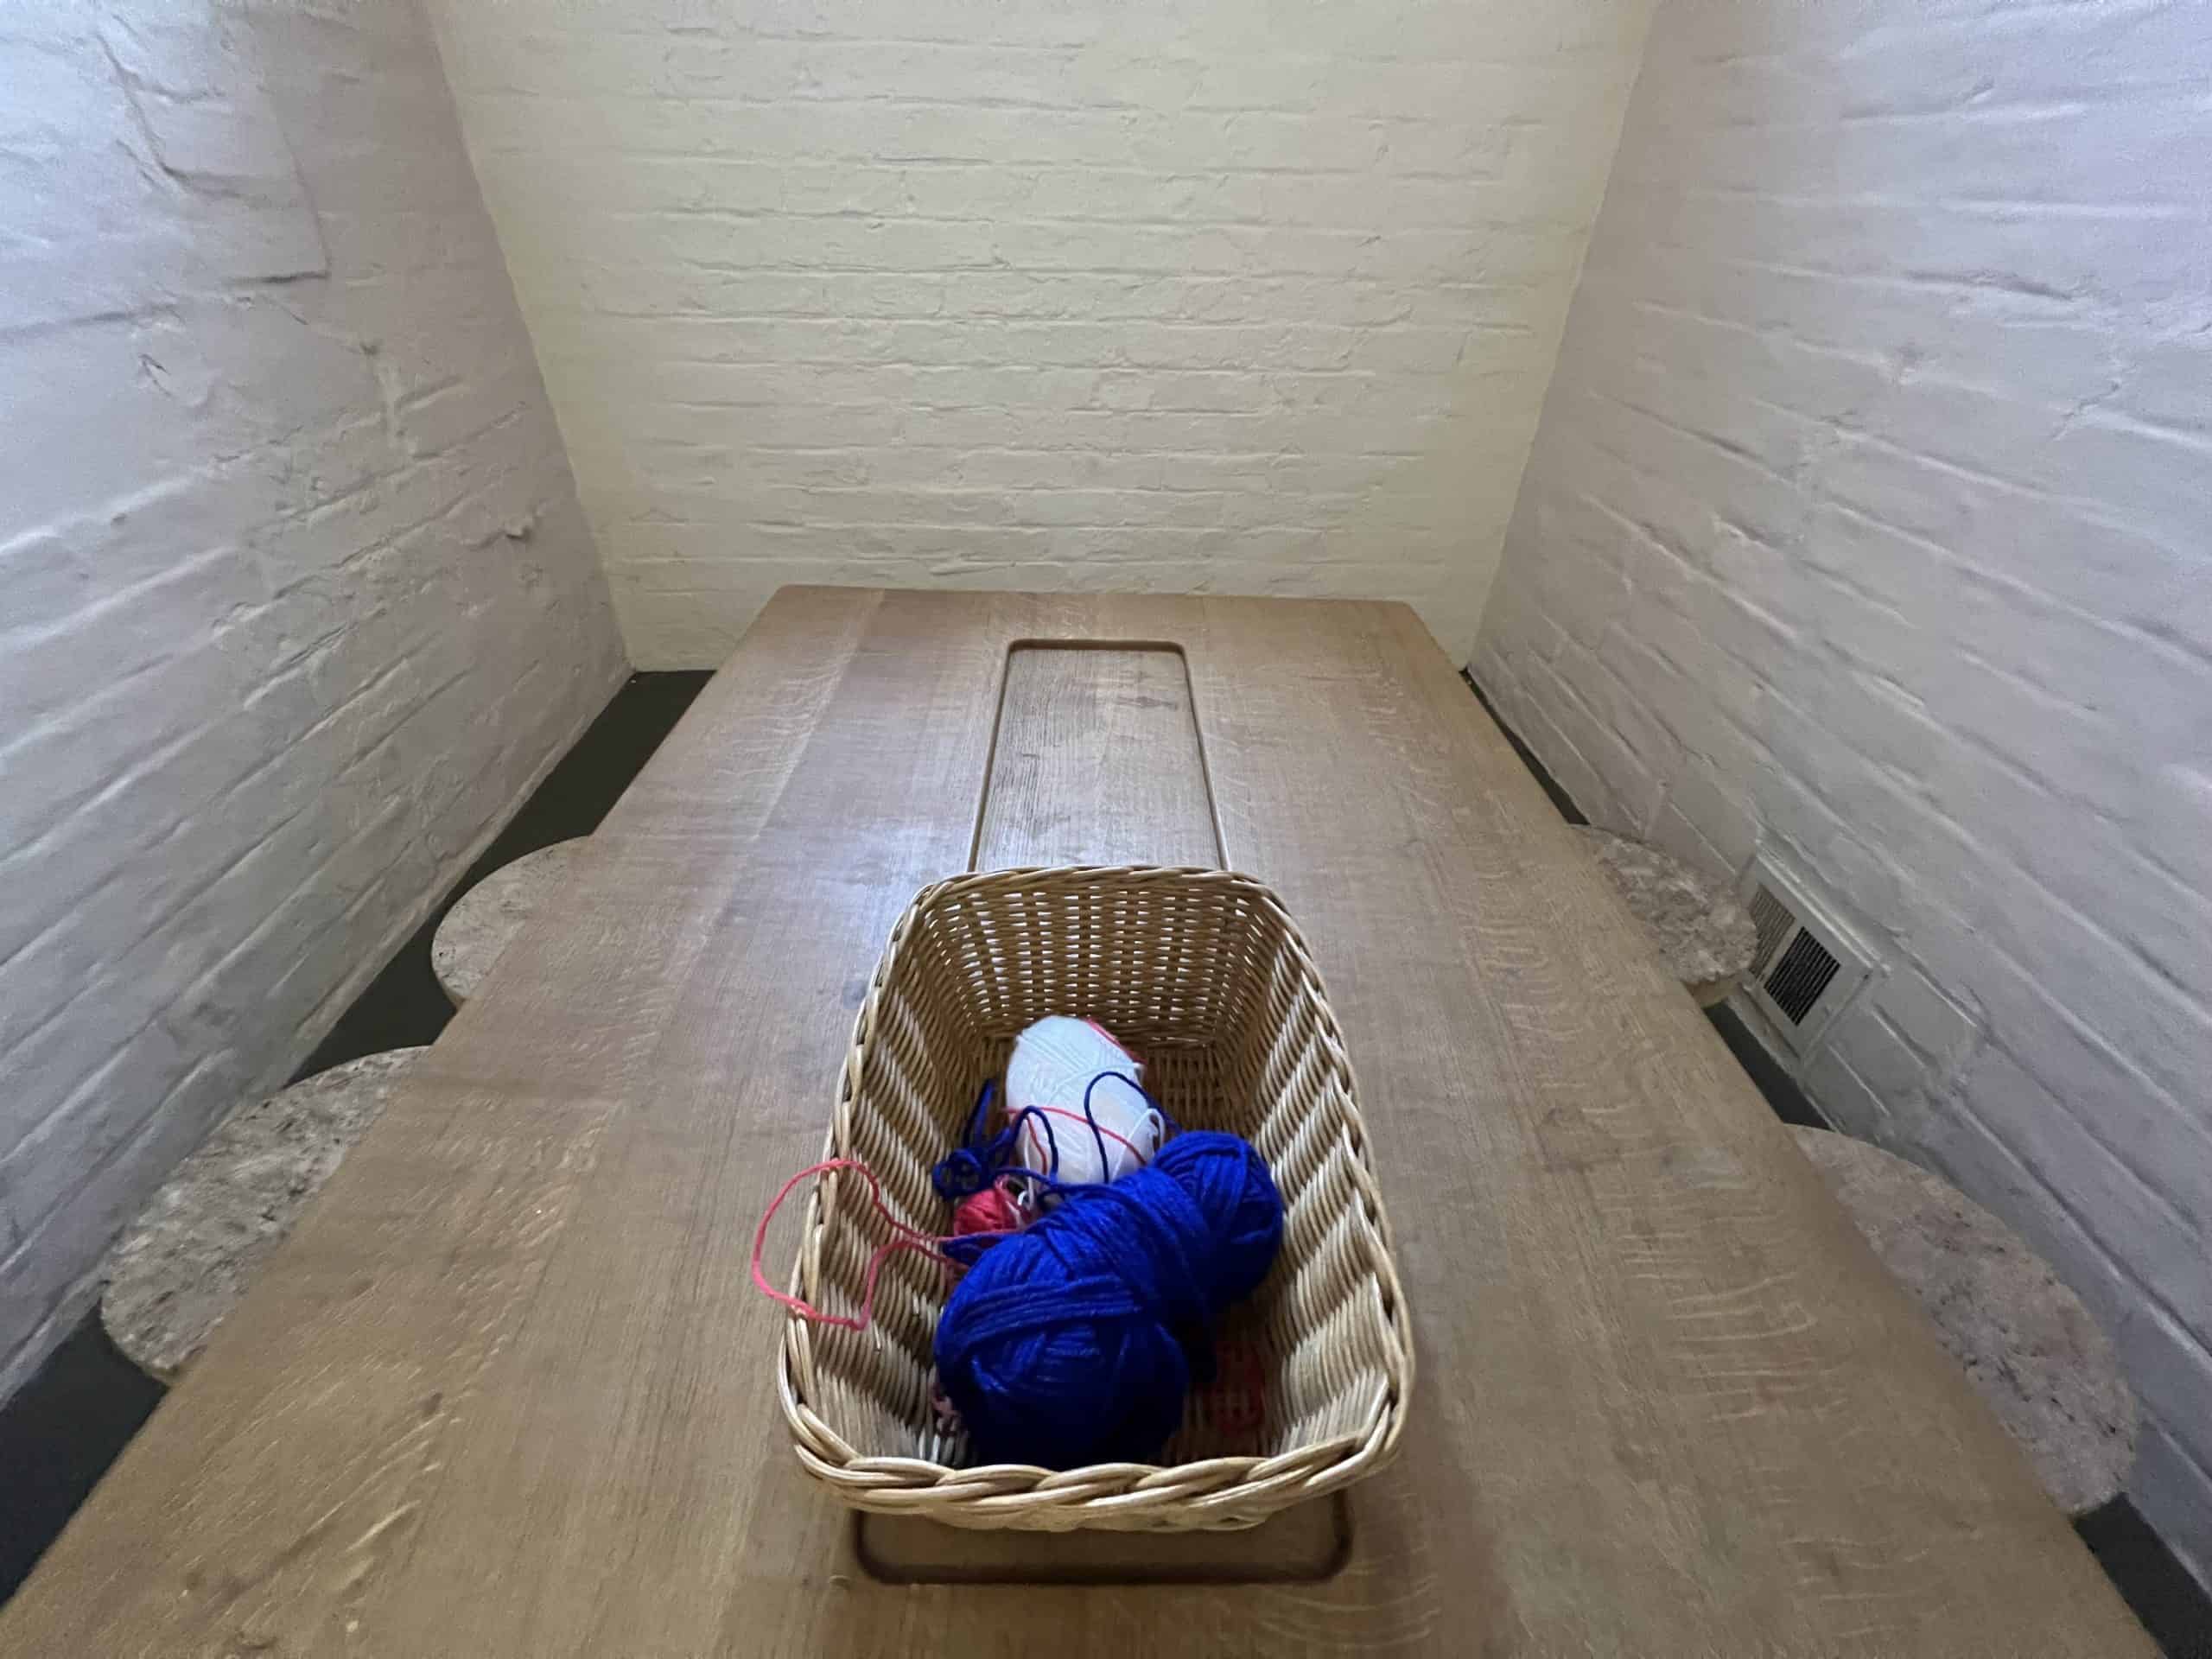 White brick walls in a prison cell. A wooden table with red, white, and blue yarn balls. On the grounds of Lincoln Castle, Lincoln, Lincolnshire, England, United Kingdom.